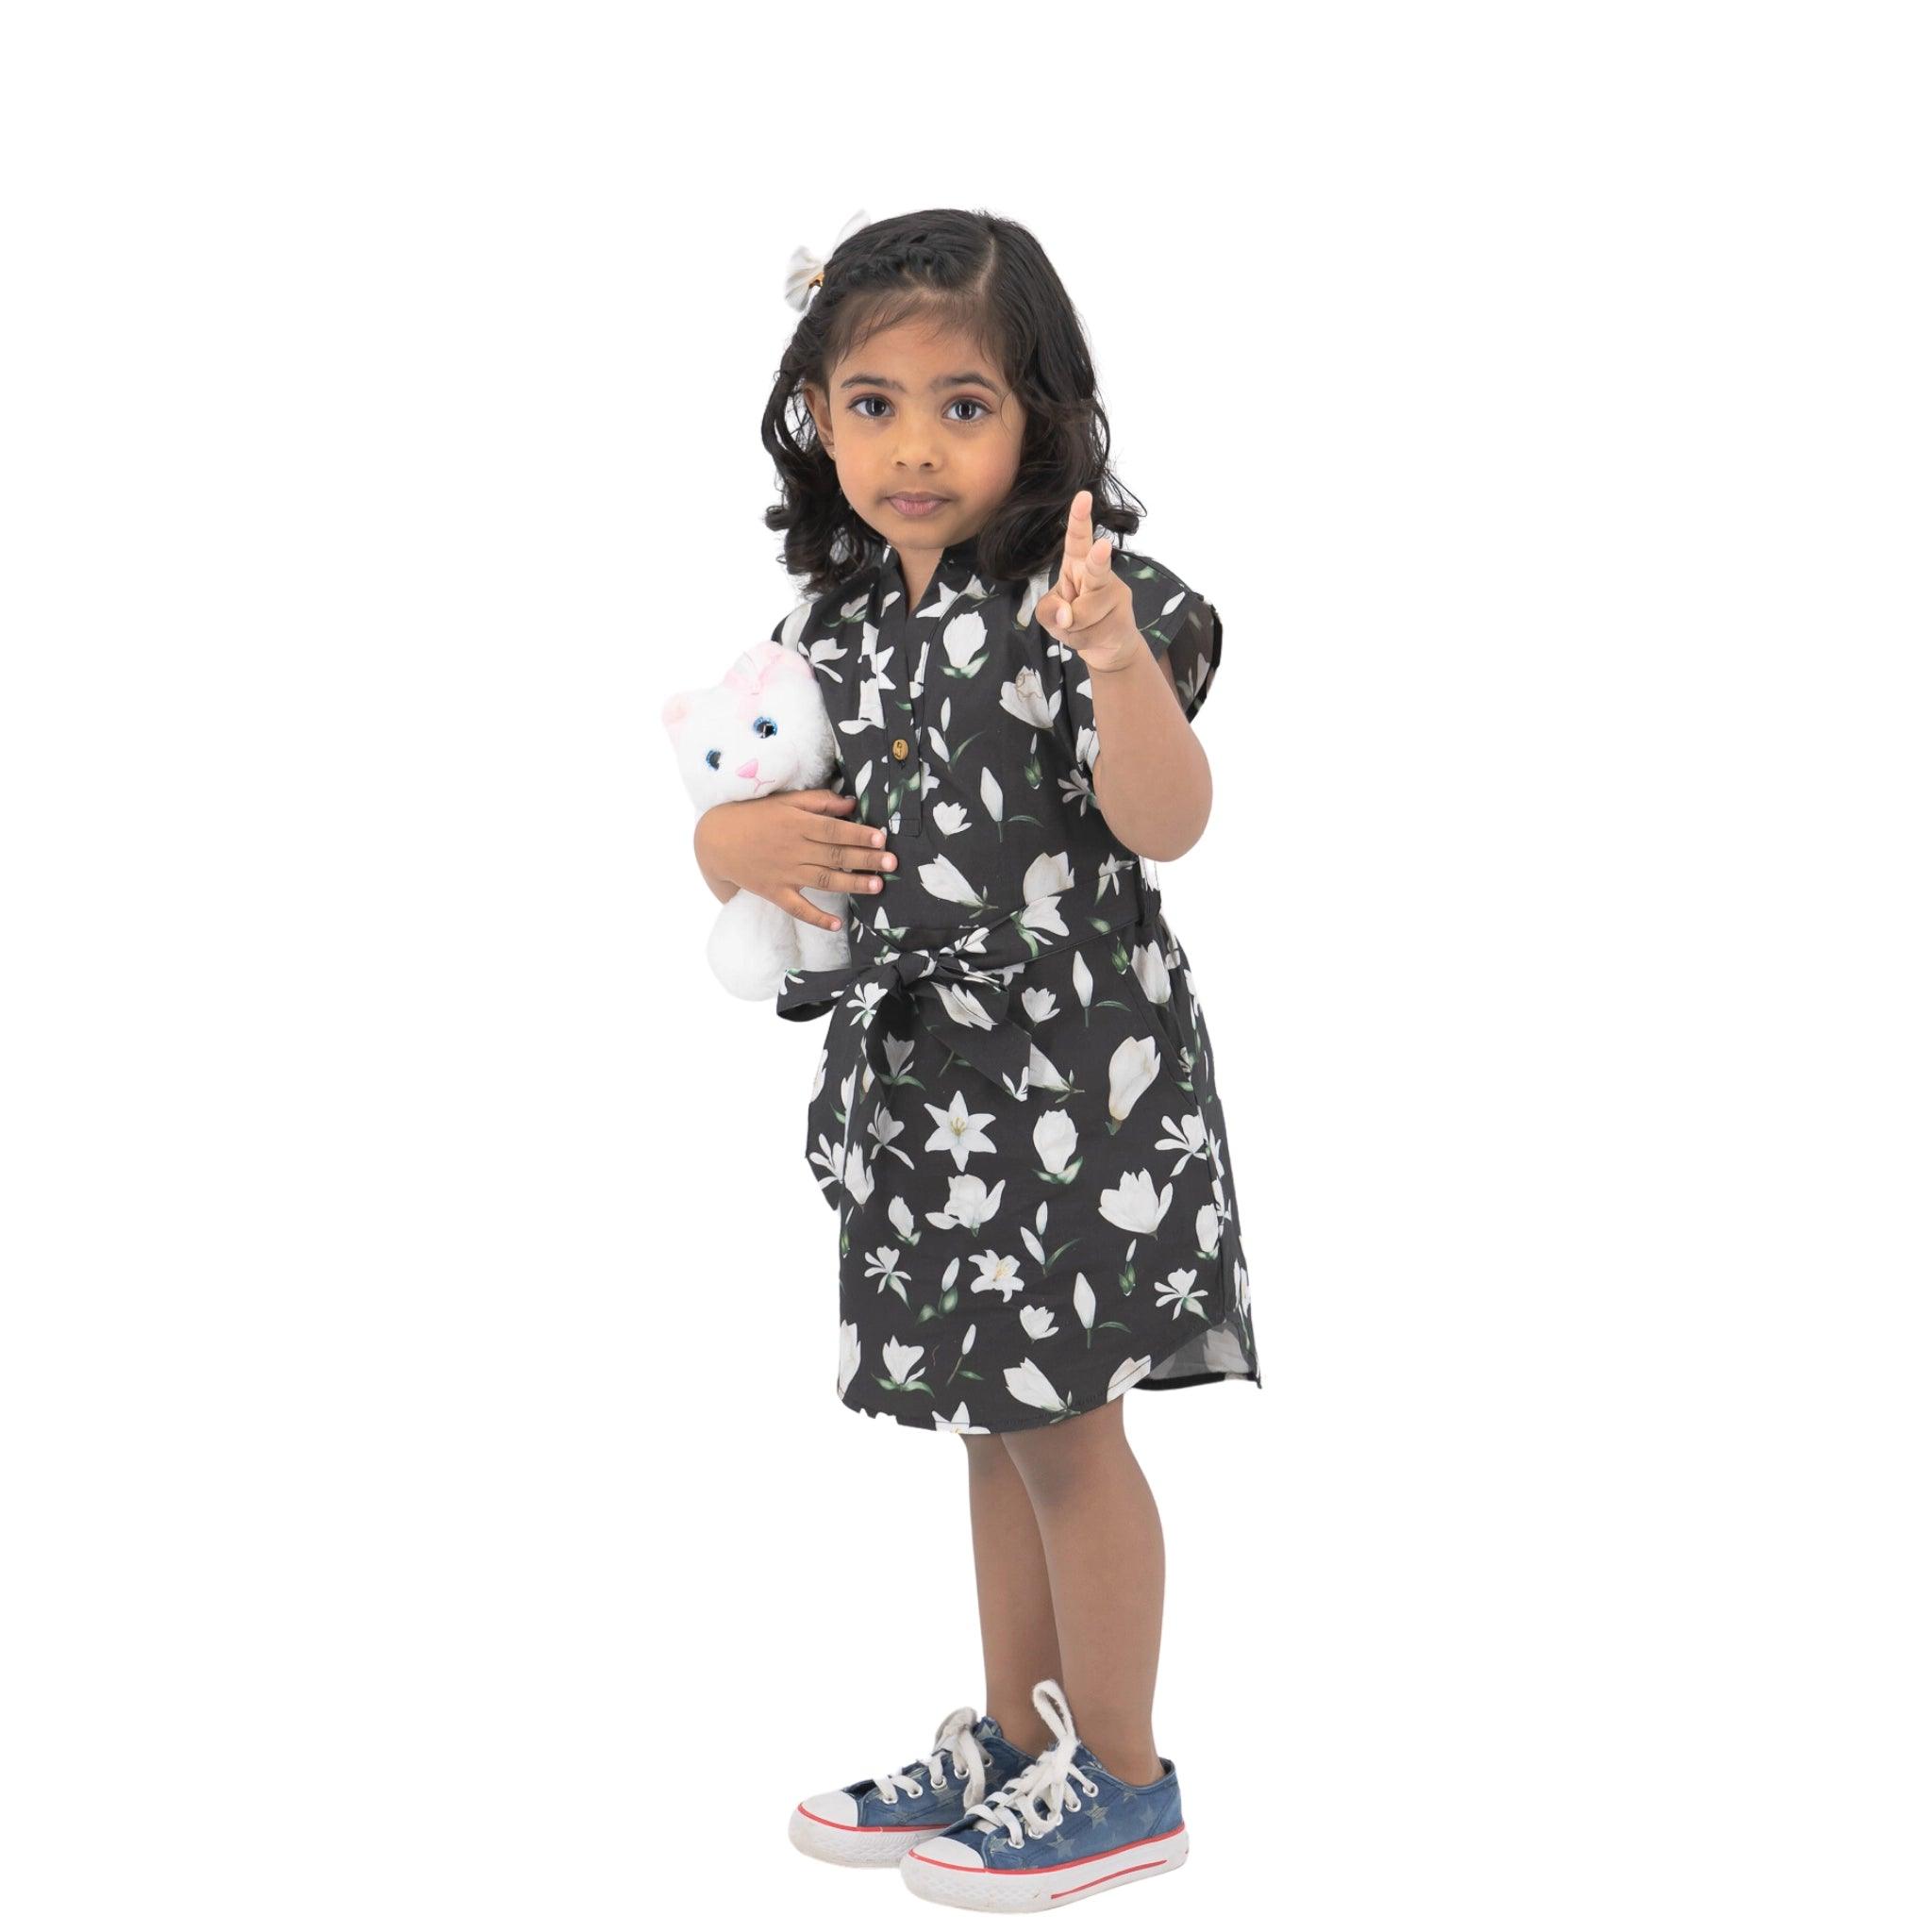 Young girl in a Karee Black Lilly Blossom Cotton Shirt Dress holding a stuffed animal and pointing forward, standing against a white background.